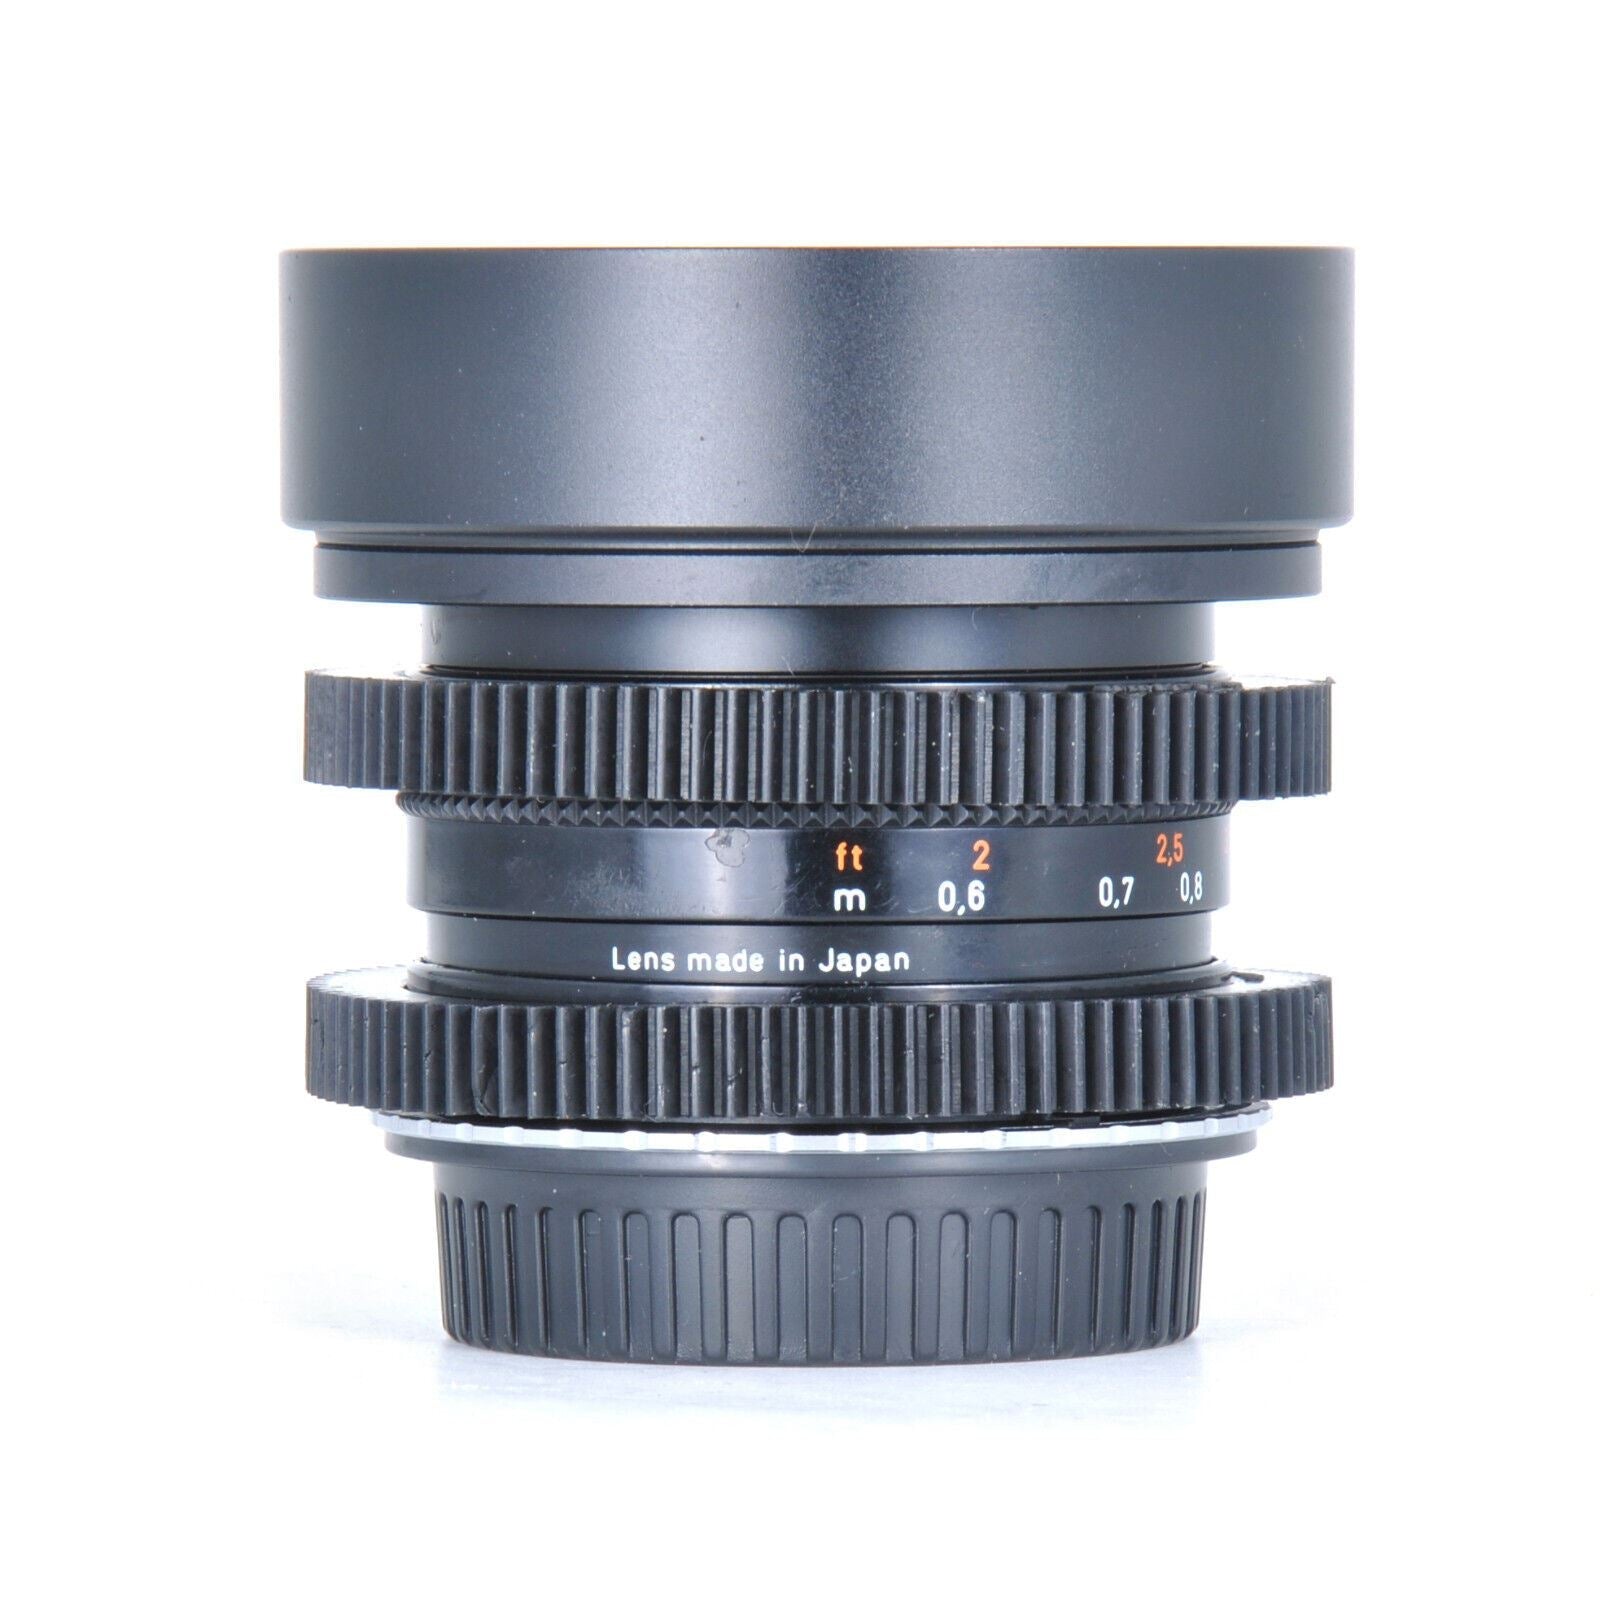 Cine Modded Carl Zeiss Planar T* 50mm F1.7 Prime Lens For Canon EF Mount! - TerPhoto Store